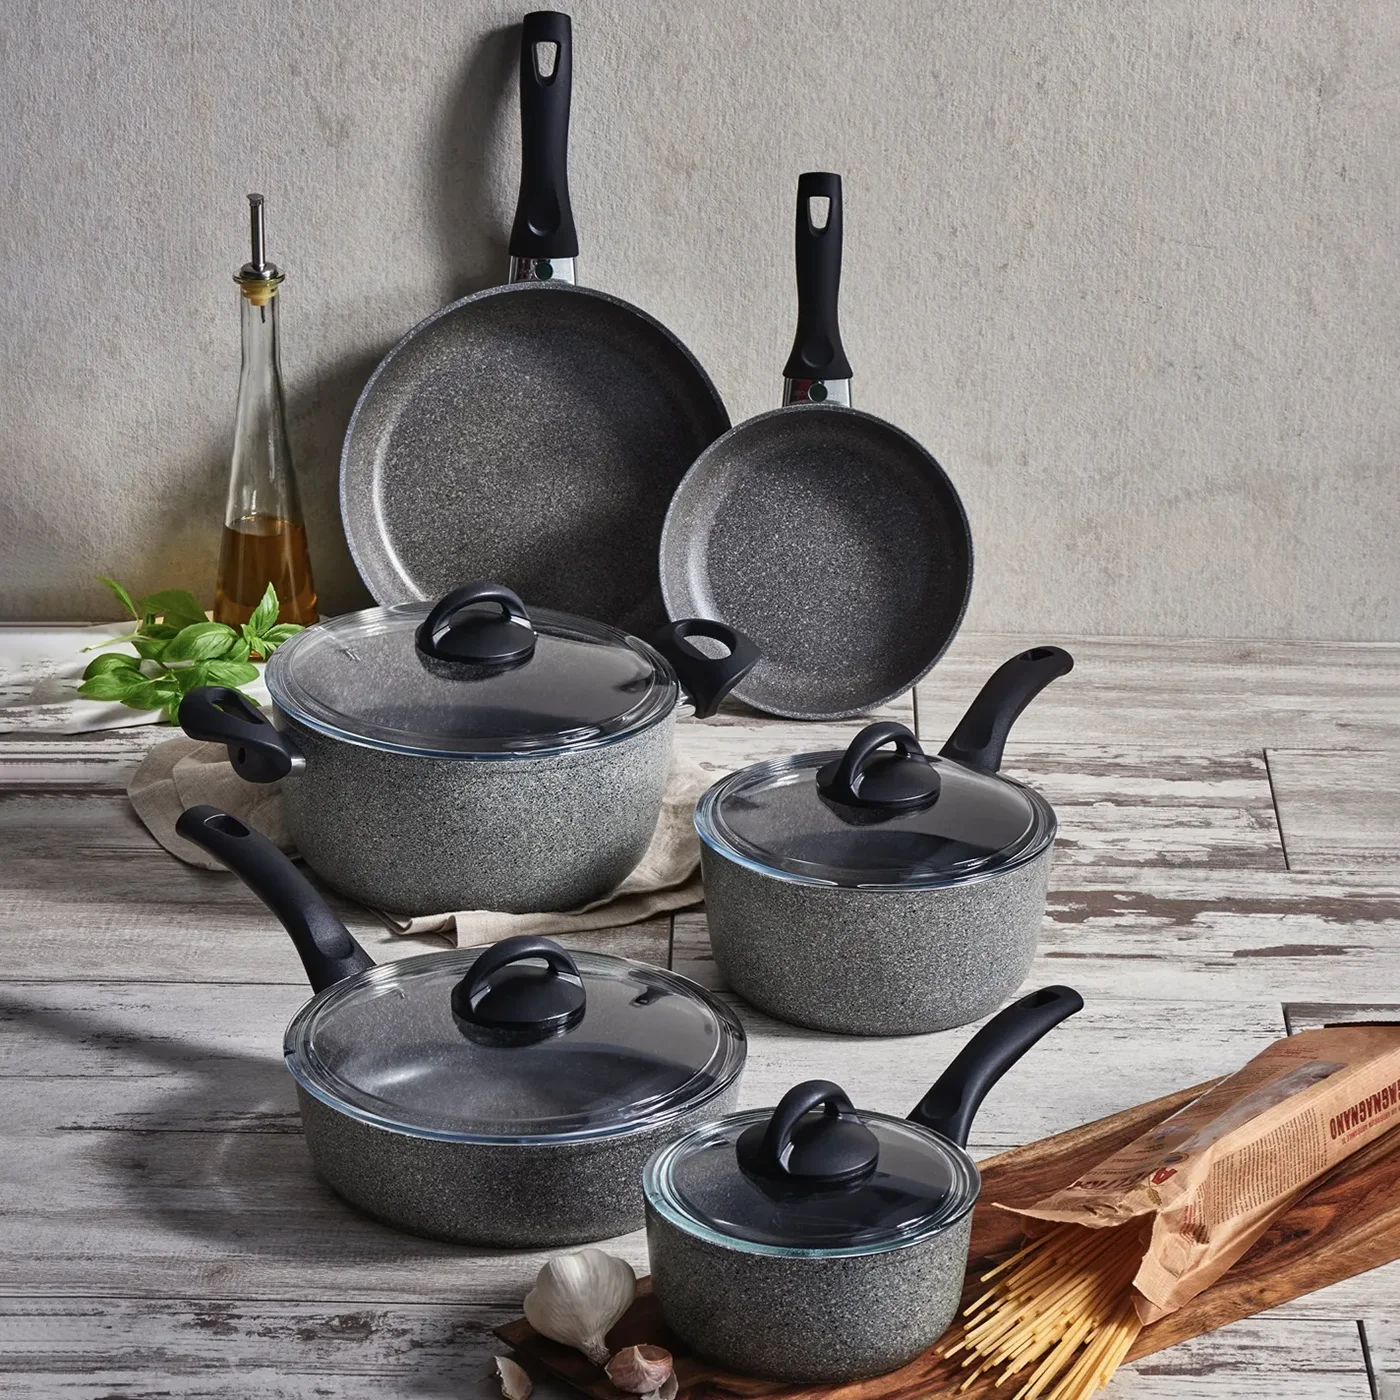 https://www.homethreads.com/files/zwilling/75001-652-ballarini-parma-by-henckels-10-piece-forged-aluminum-nonstick-cookware-set-pots-and-pans-set-granite-made-in-italy-2.webp